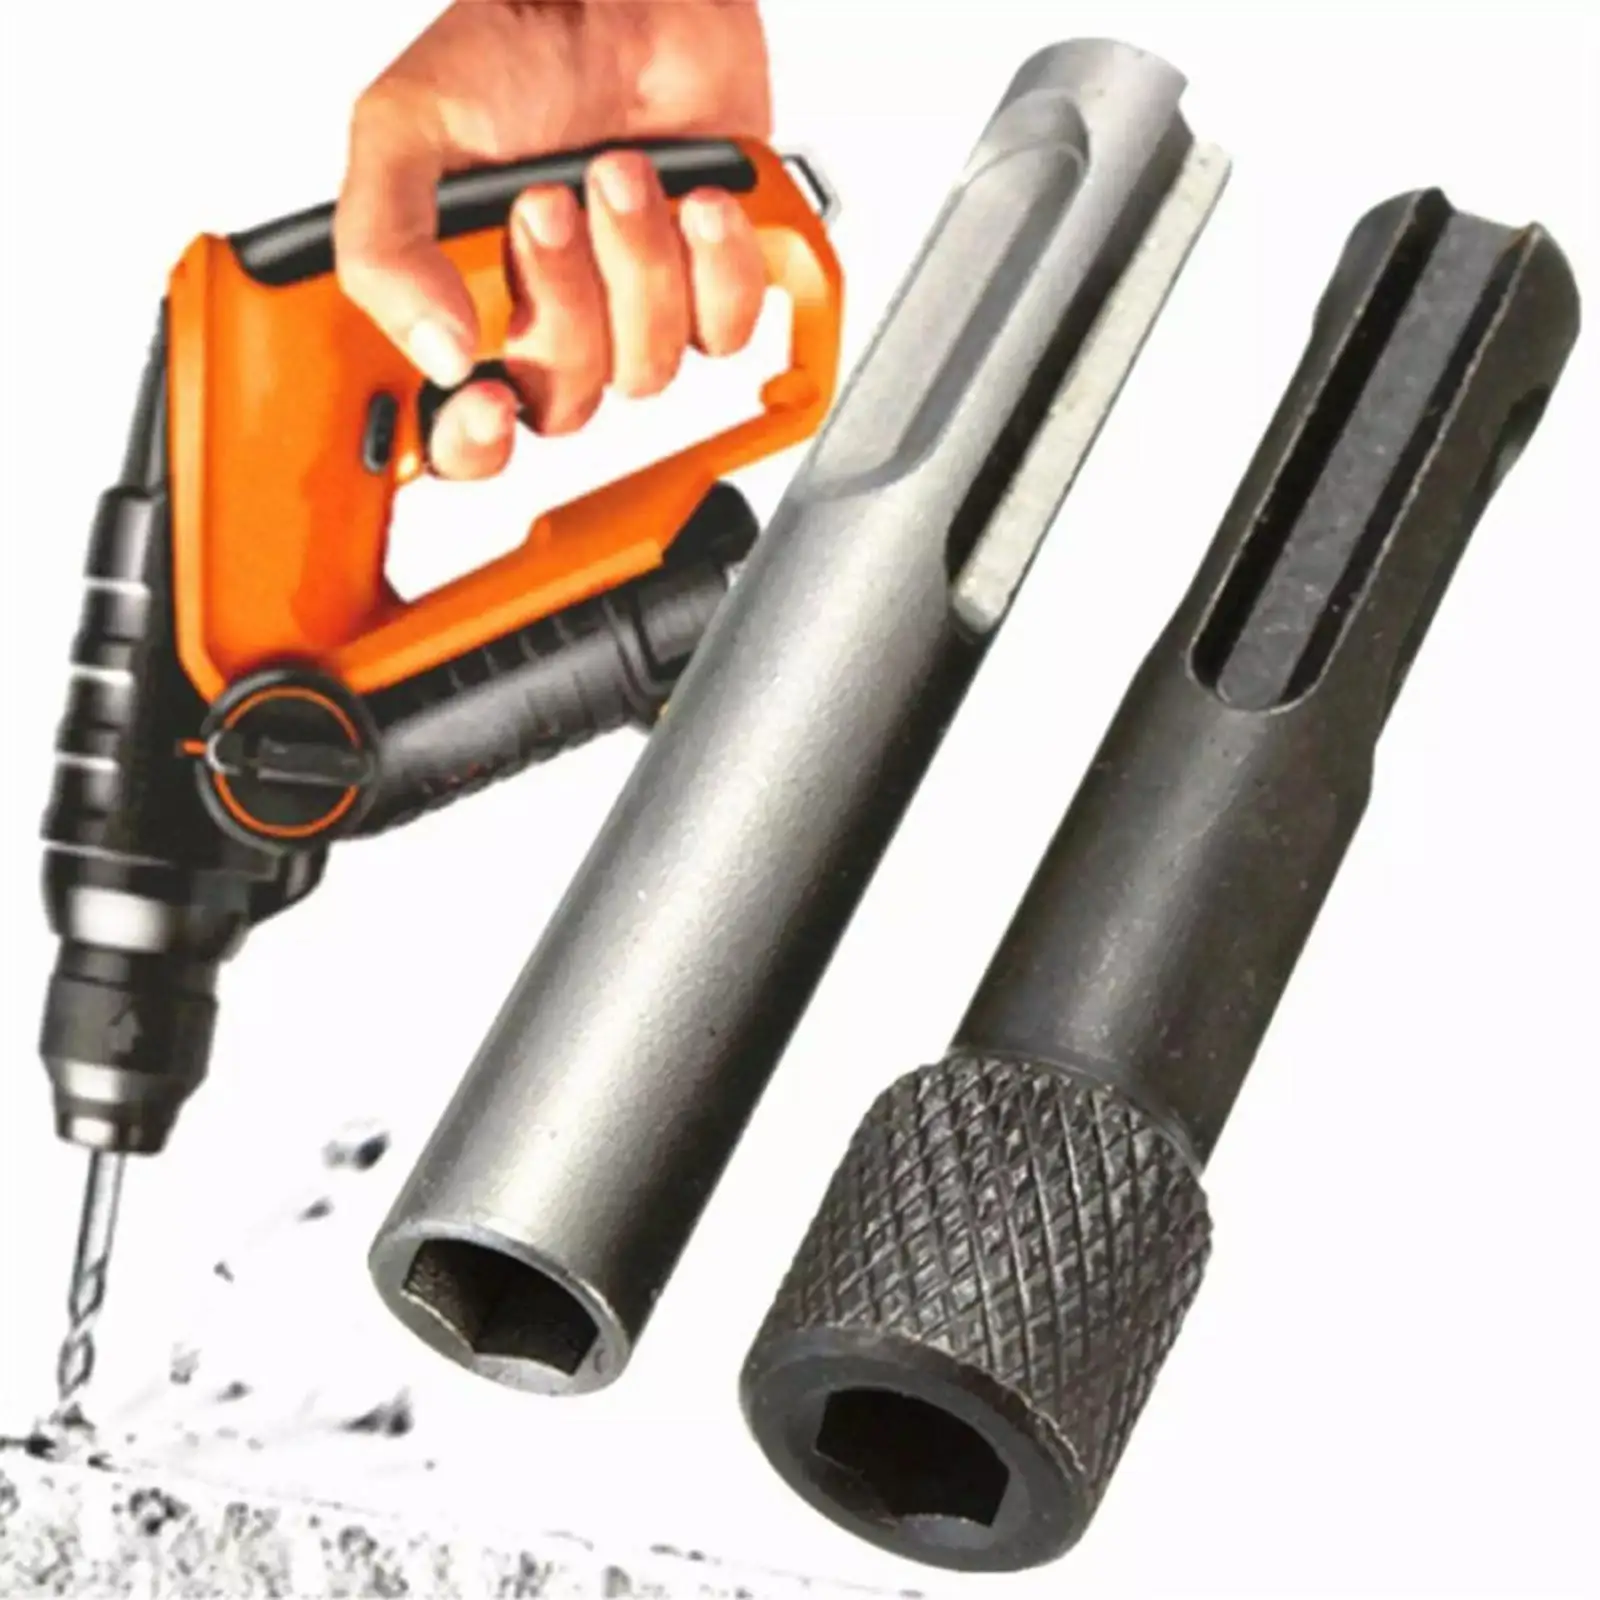 Portable Hexagon Screwdriver Shank Adapter Rotary Hexagon Socket Shank Quick Fits Durable Drill Kit for Electric Drill Machine